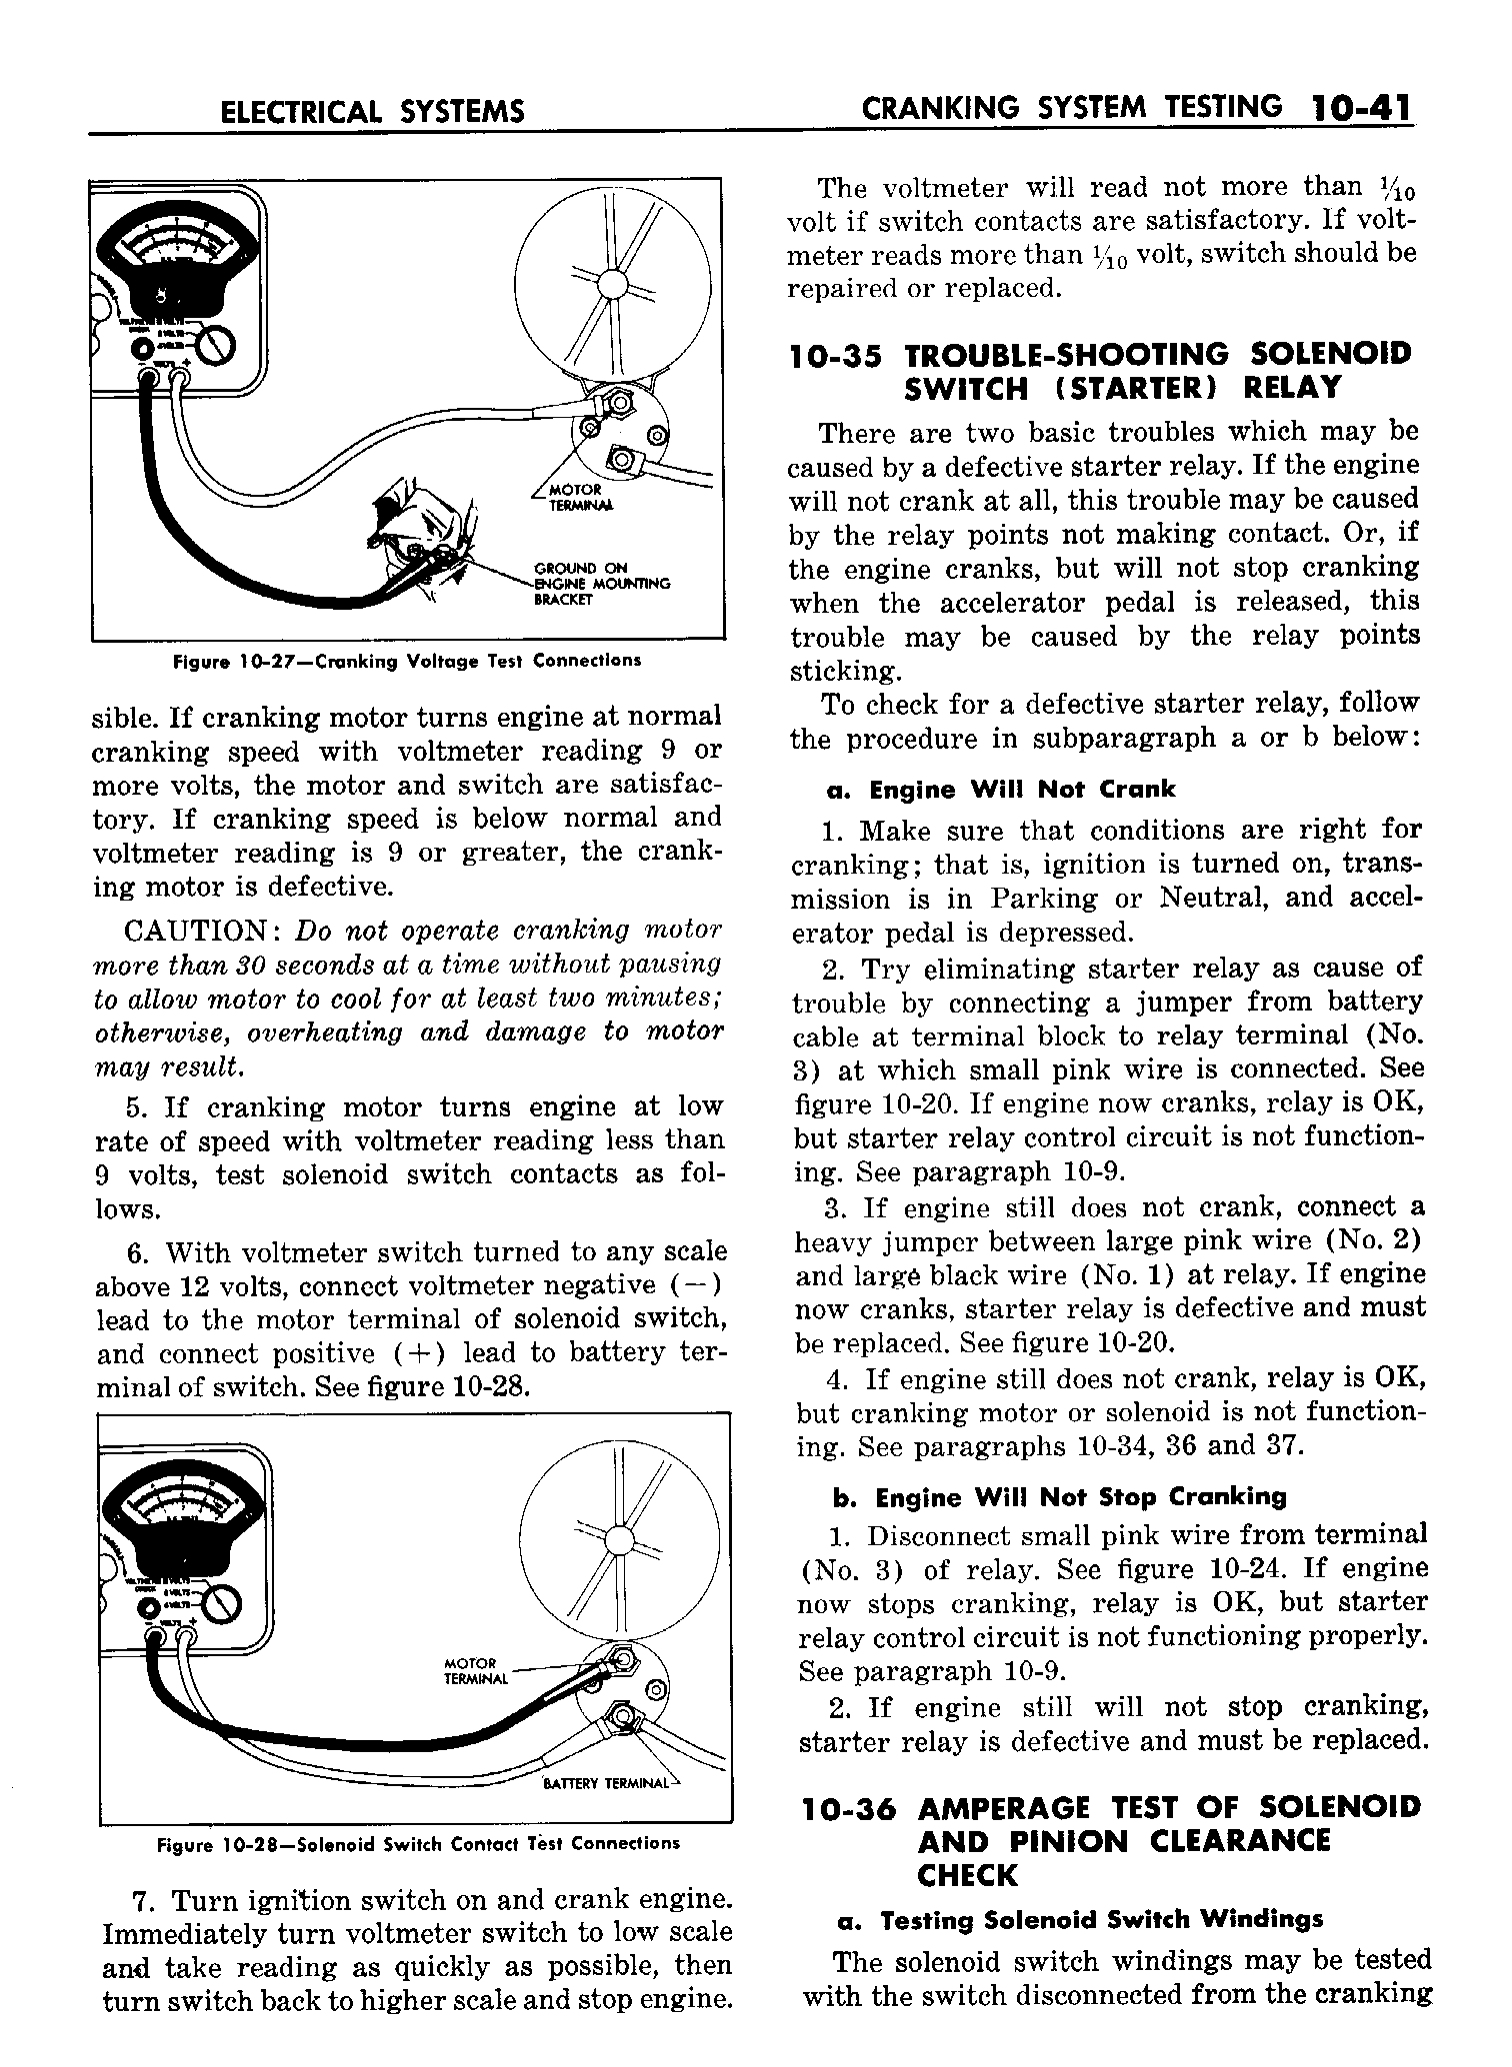 n_11 1958 Buick Shop Manual - Electrical Systems_41.jpg